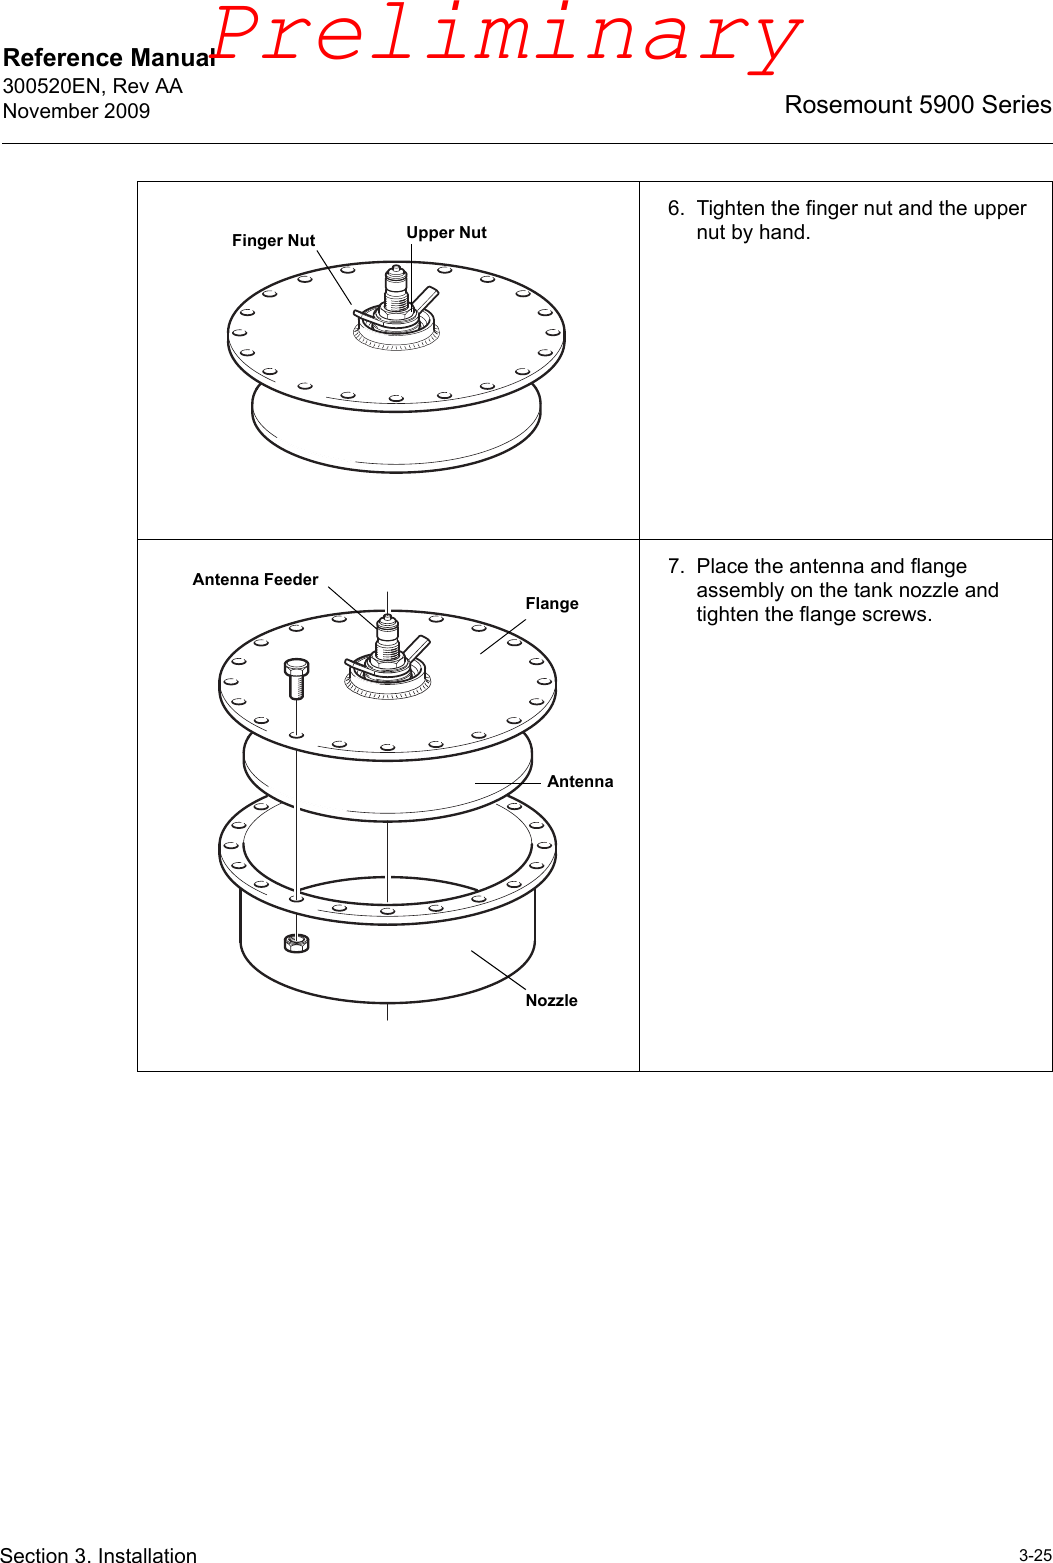 Reference Manual 300520EN, Rev AANovember 20093-25Rosemount 5900 SeriesSection 3. Installation6. Tighten the finger nut and the upper nut by hand.7. Place the antenna and flange assembly on the tank nozzle and tighten the flange screws.Finger Nut Upper NutAntennaFlangeNozzleAntenna FeederPreliminary